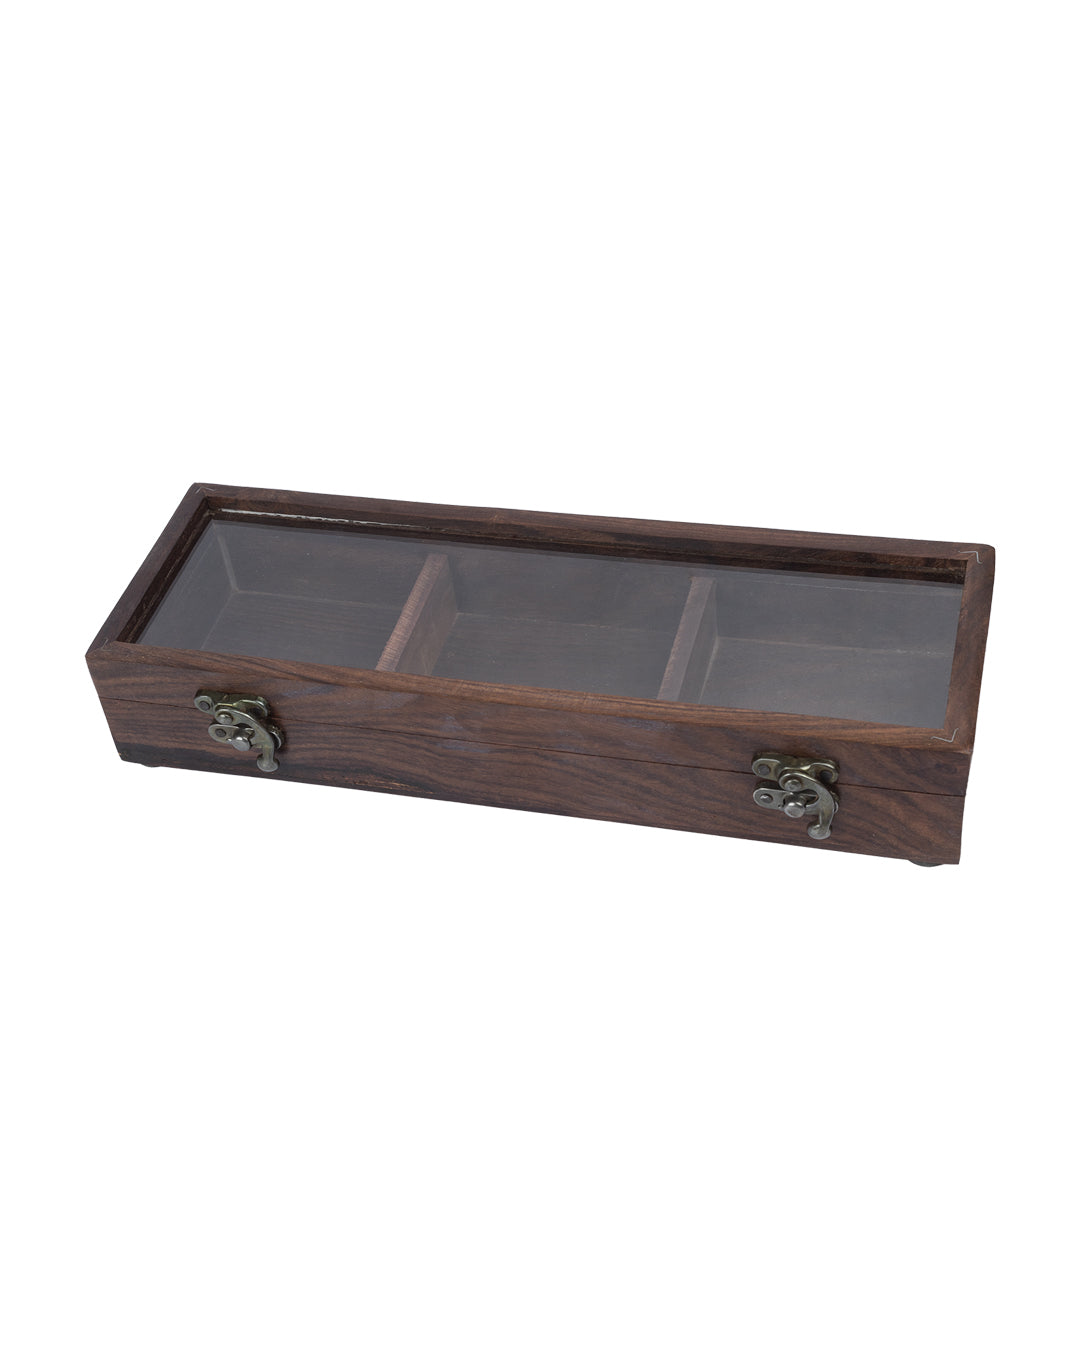 Sheesham Wood Rectangular Spice Box With Hand Carving (3 Compartments)